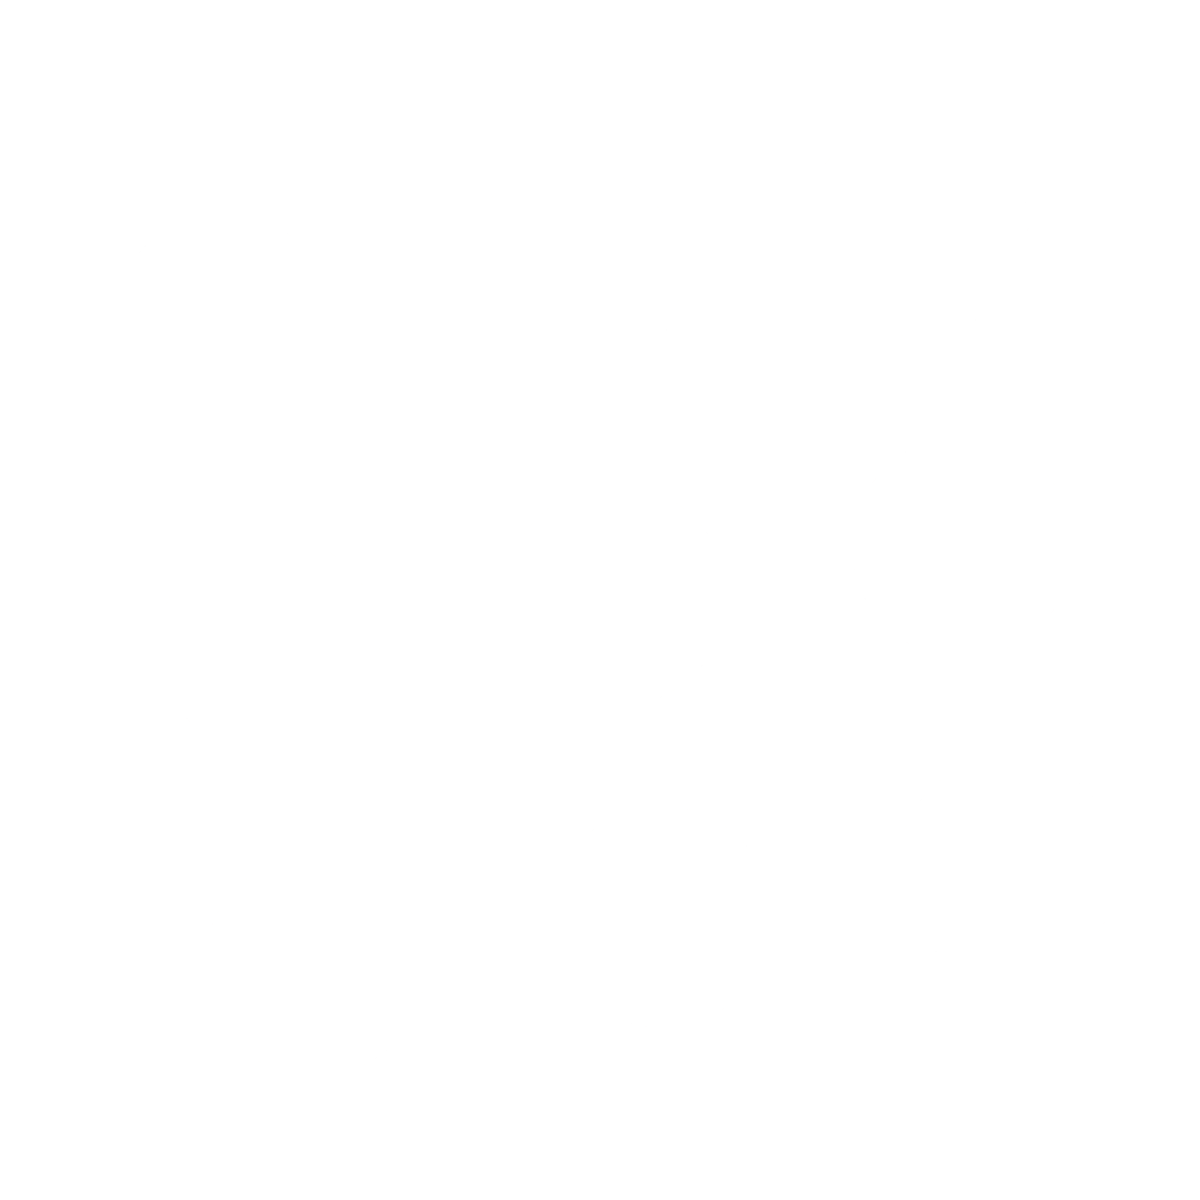 Nine dots which form a square, representing the concept of community.